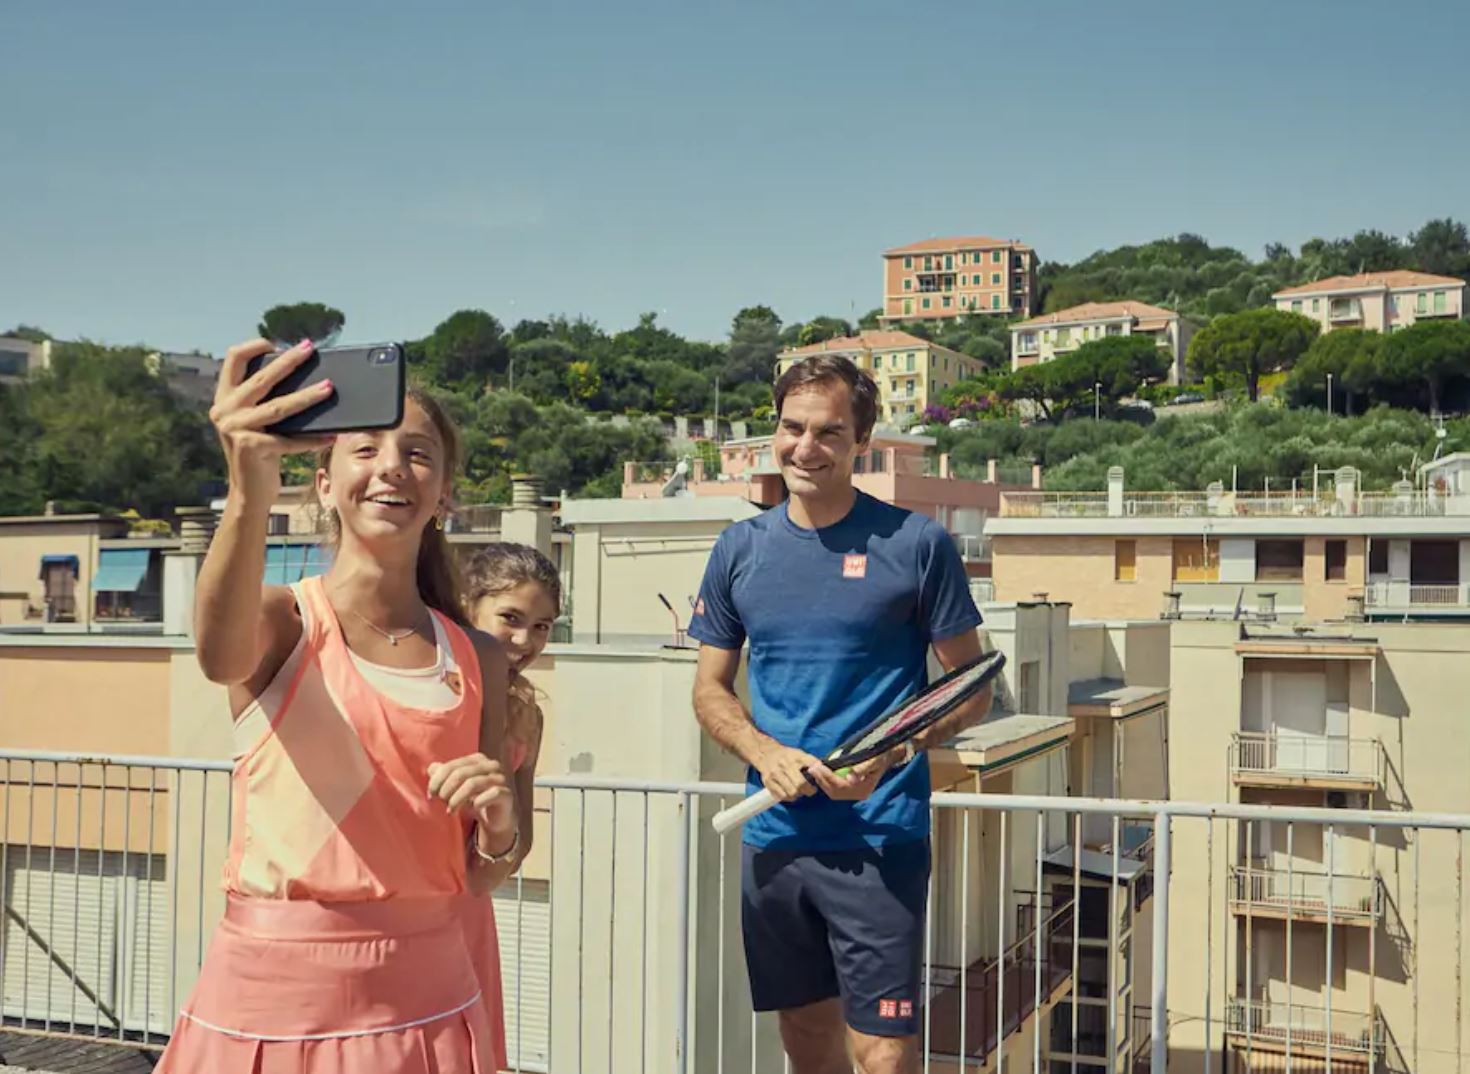 Watch: Federer Joins Vittoria and Carola for Rooftop Rally and Pasta in Liguria 